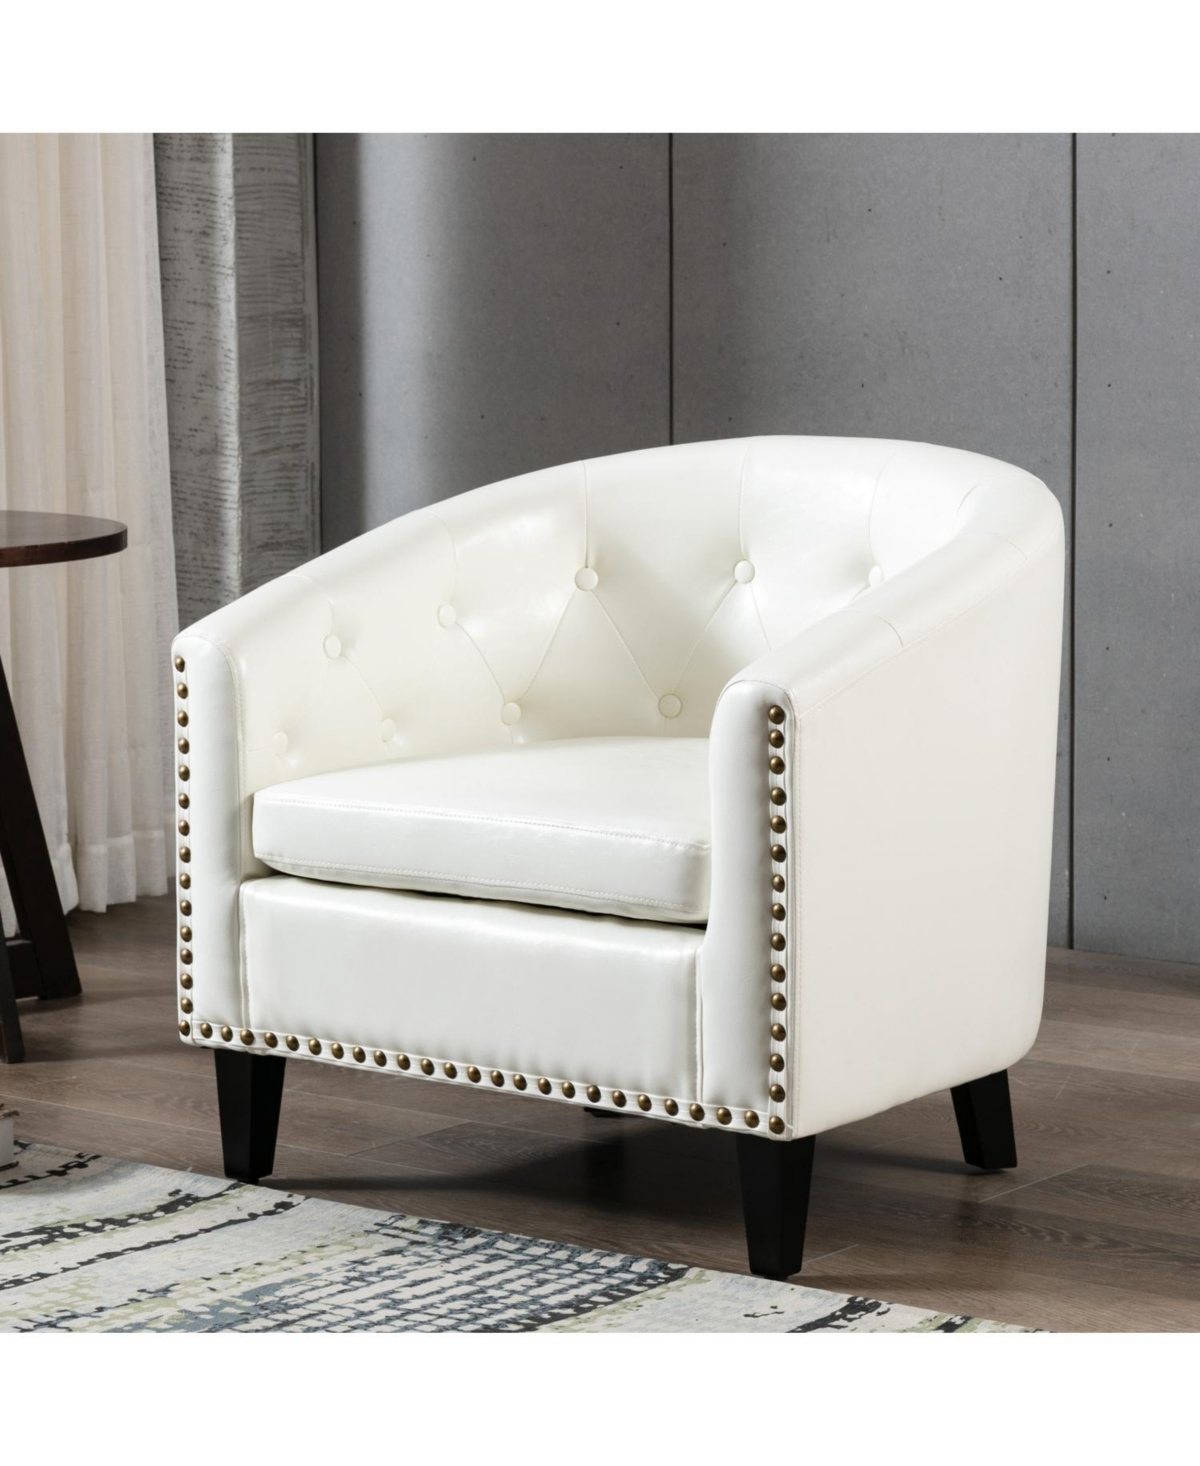 Simplie Fun Pu Leather Tufted Barrel Chair Tub Chair For Living Room Bedroom Club Chairs In White